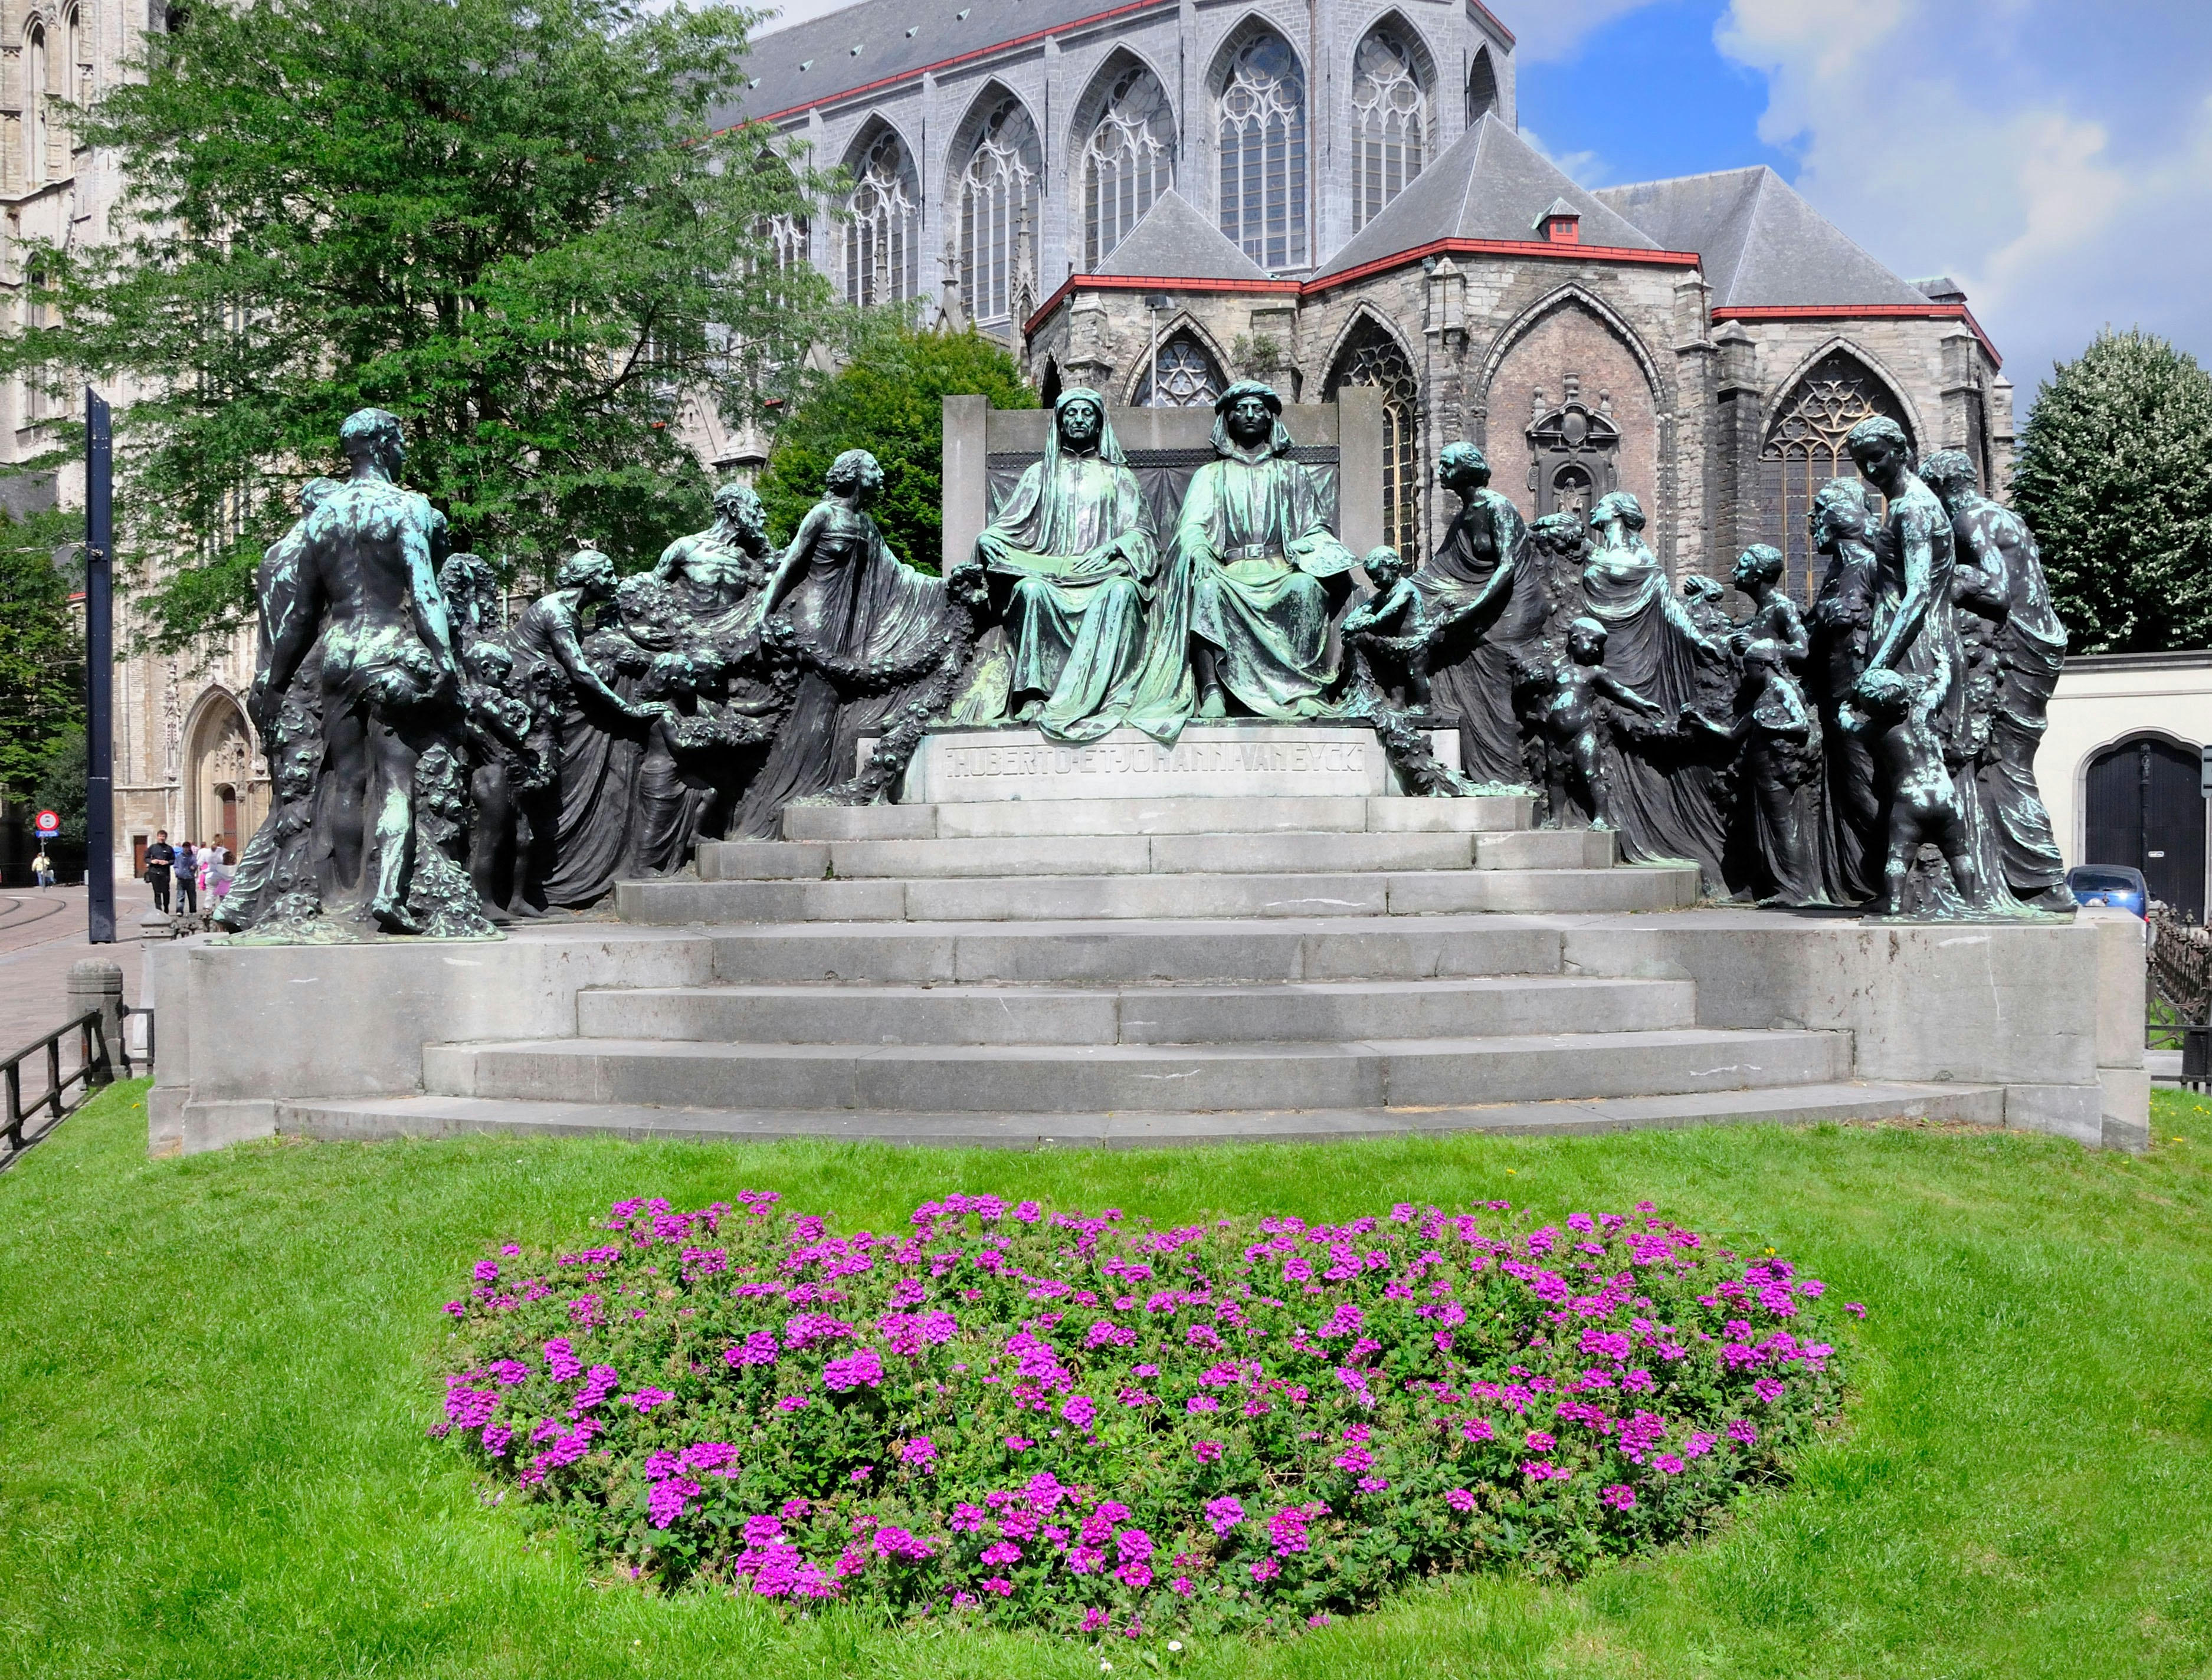 A statue of the Van Eyck brothers in Ghent, depicting the two artists sat side by side atop stone steps surrounded by statues of other people, with purple flowers in the foreground.